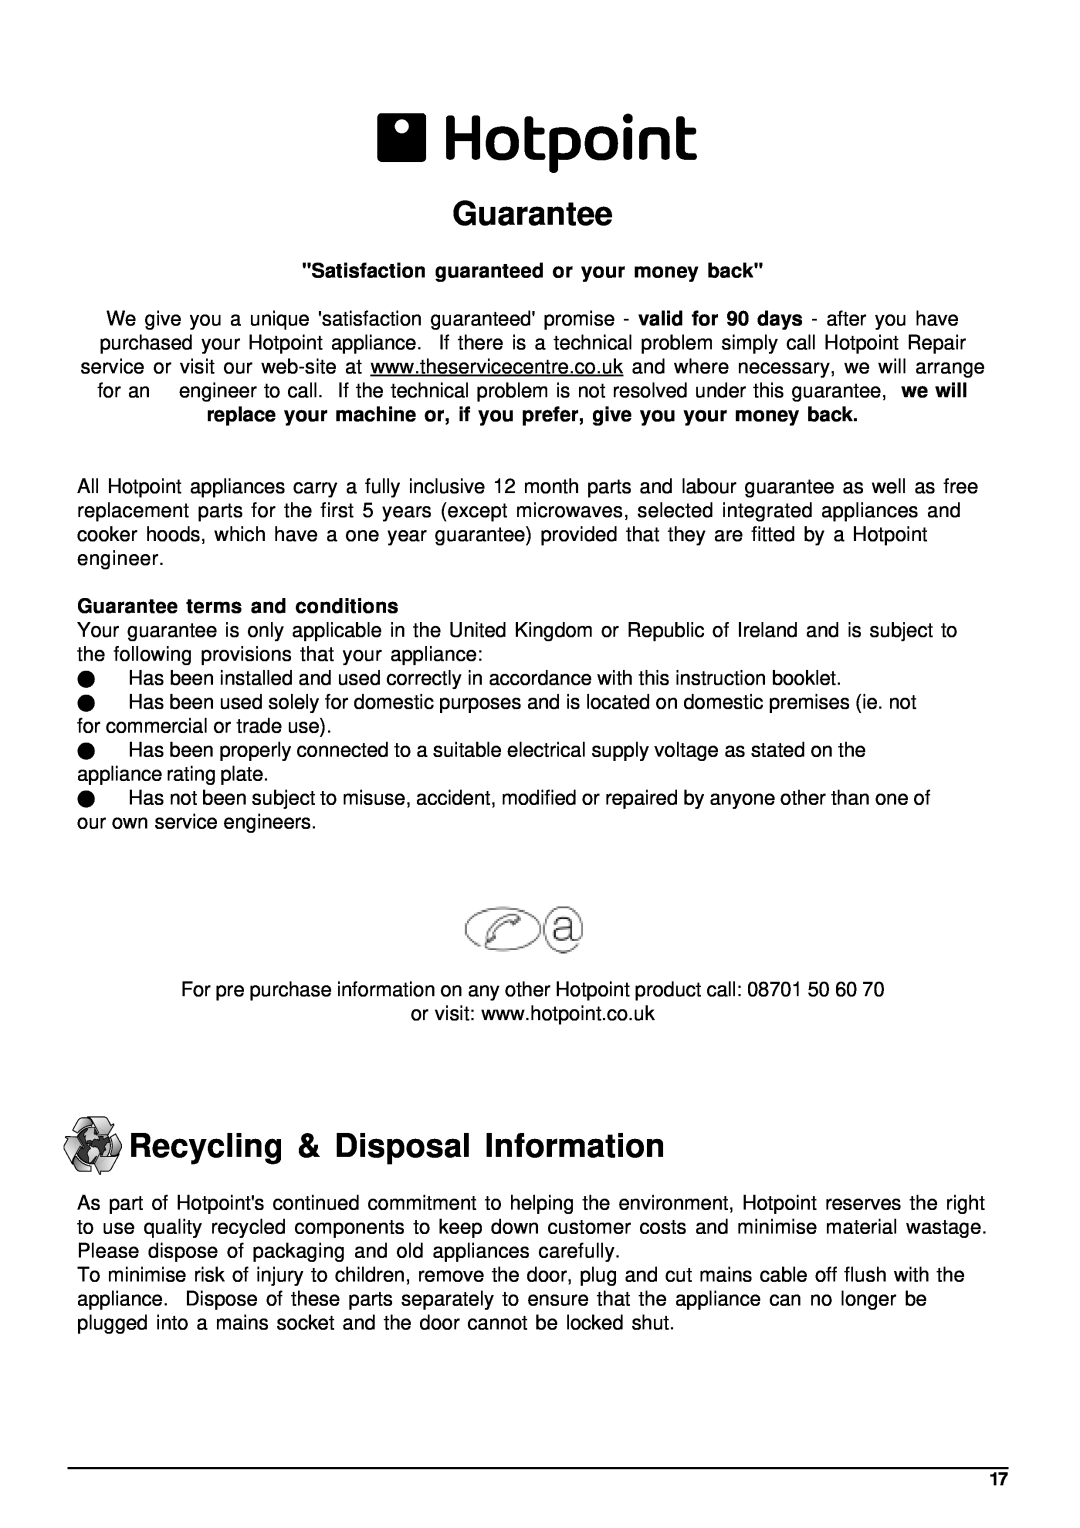 Hotpoint SDW 60 manual Guarantee, Recycling & Disposal Information, Satisfaction guaranteed or your money back 